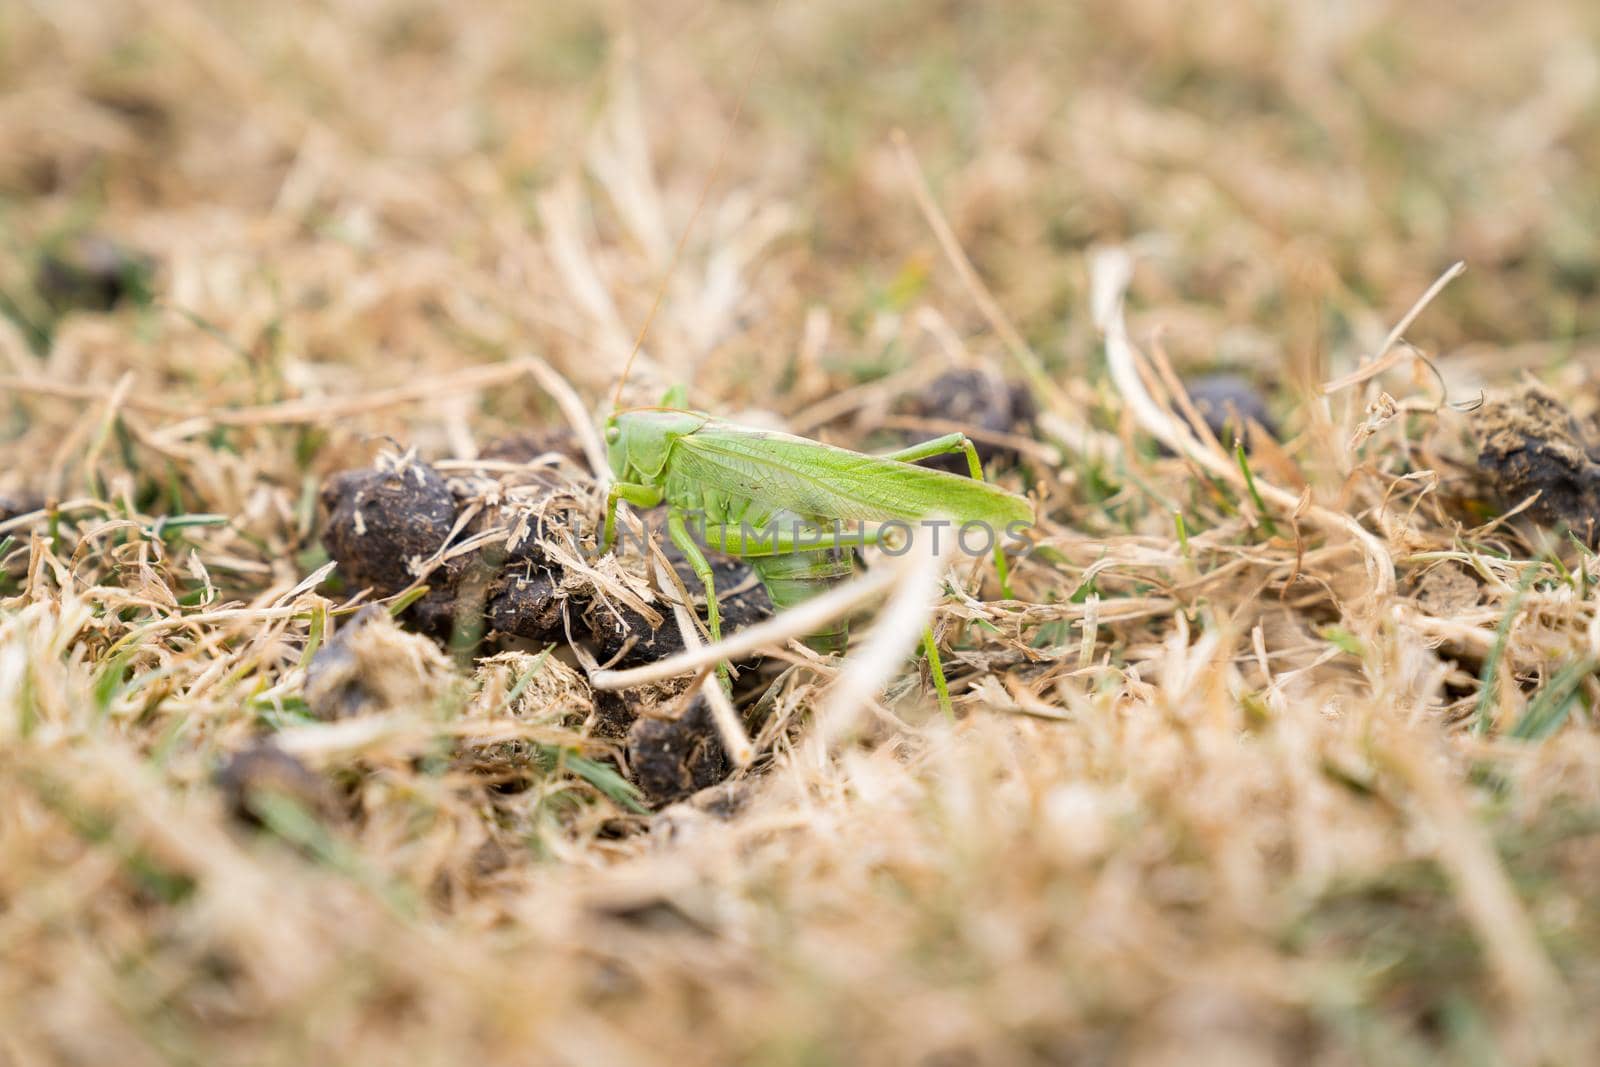 One Large green grasshopper sitting in the dry grass at maiden Castle Dorchester